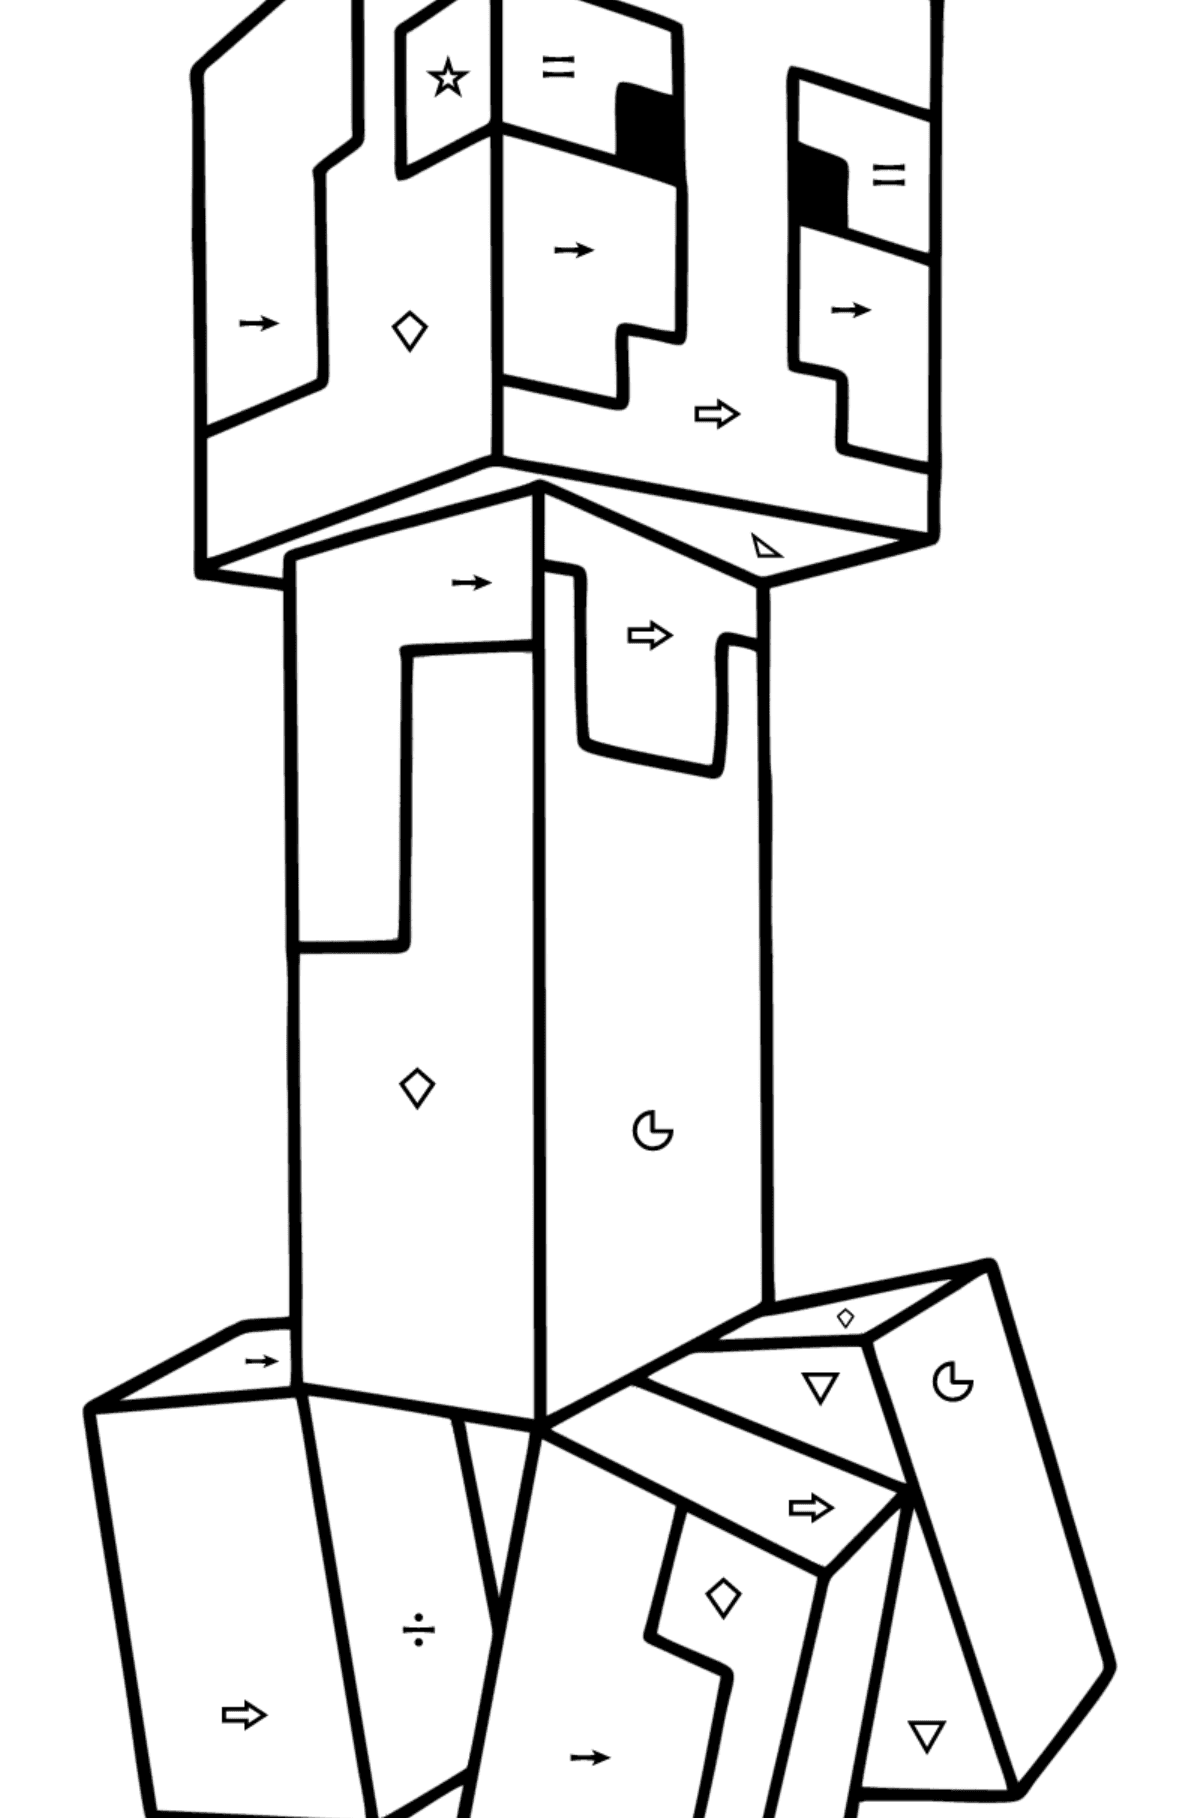 Minecraft Creeper coloring page - Coloring by Symbols and Geometric Shapes for Kids